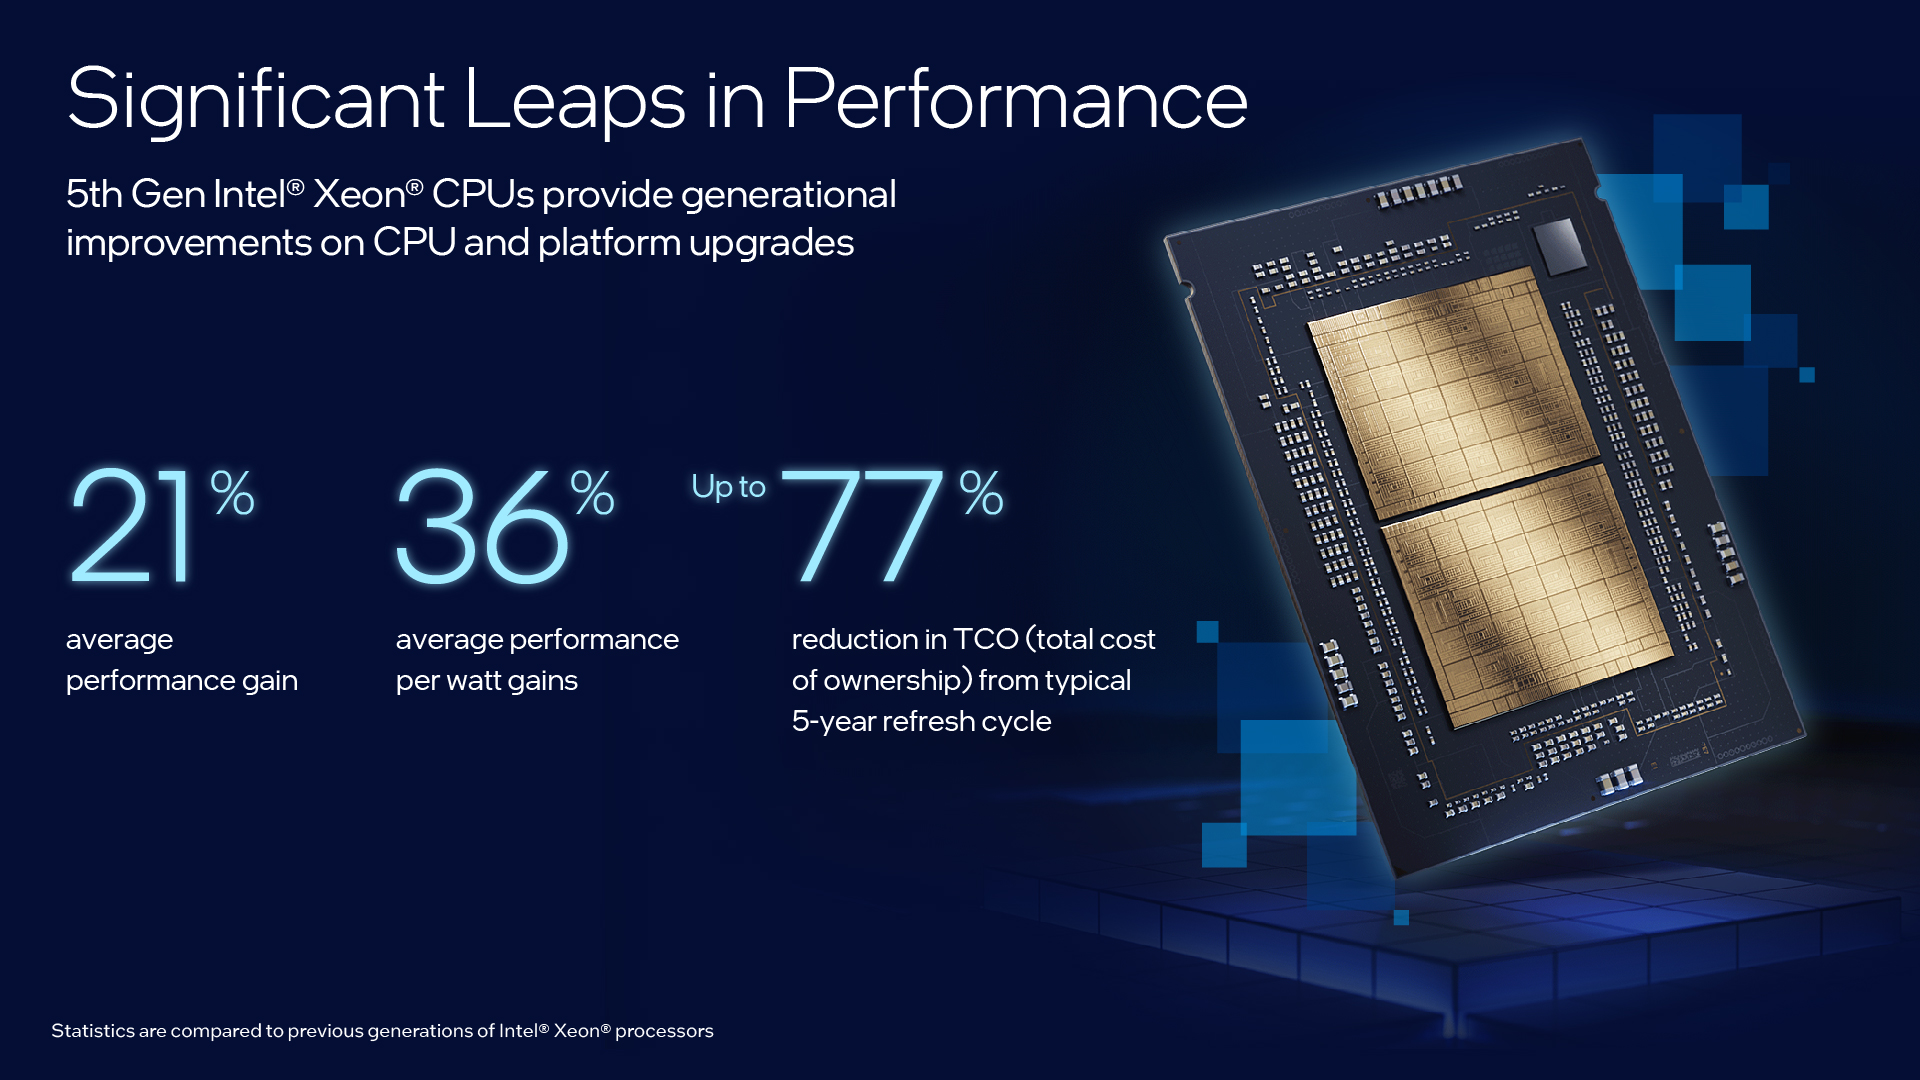 New 5th Gen Intel Xeon Processors are Built with AI Acceleration in